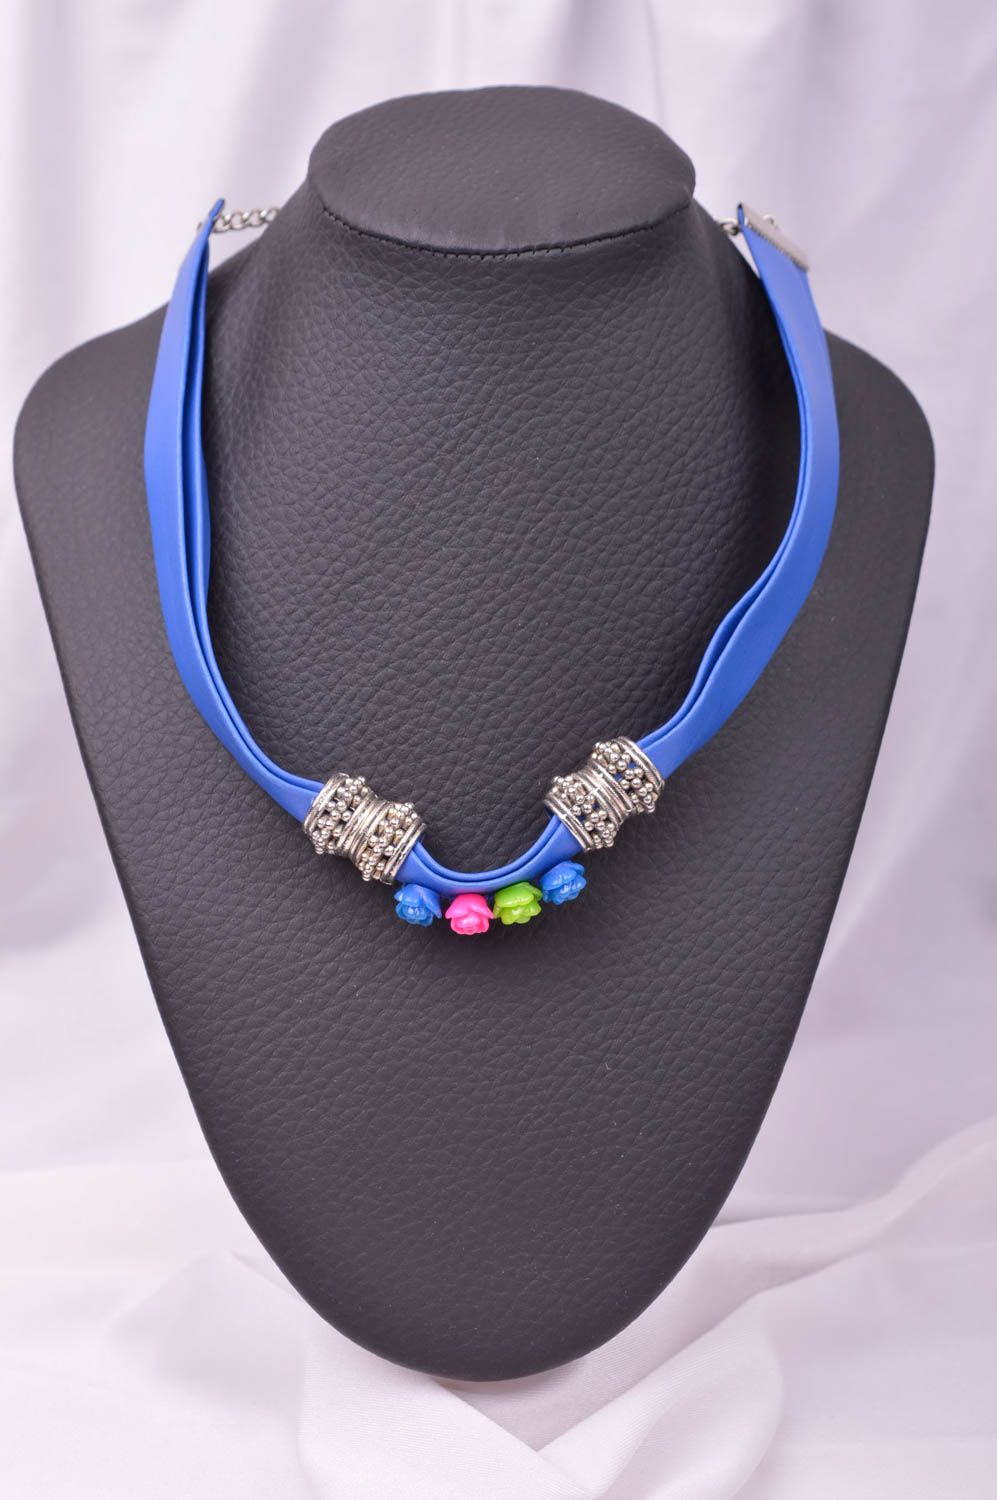 Blue beaded necklace designer colorful neck accessory perfect present photo 1